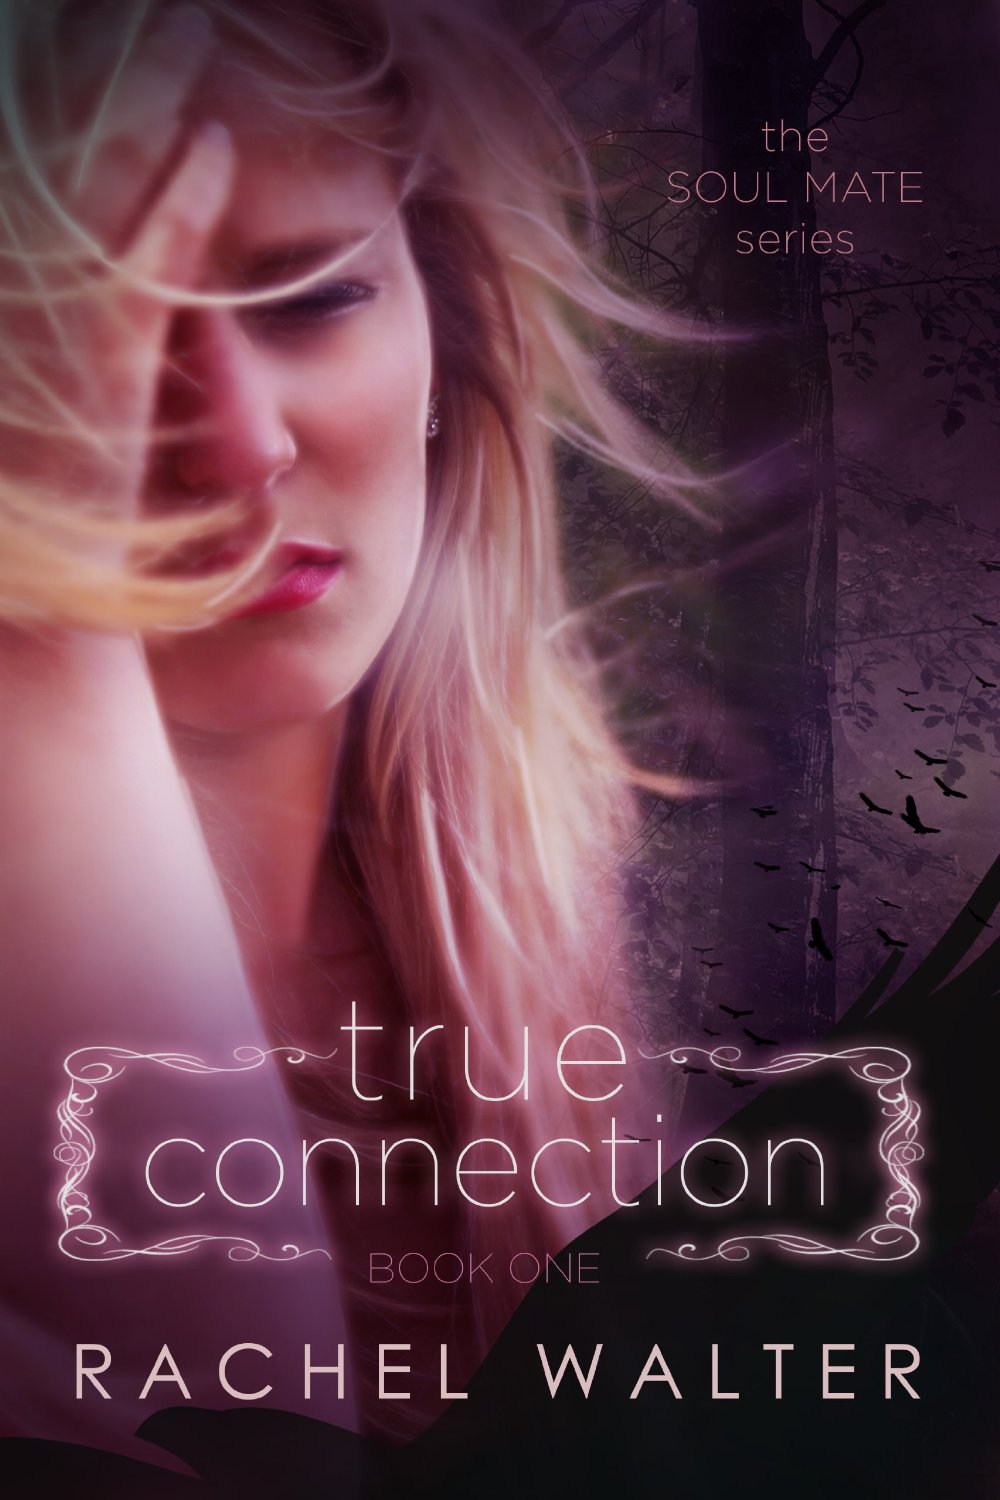 True Connection (The Soul Mate Series) by Rachel Walter